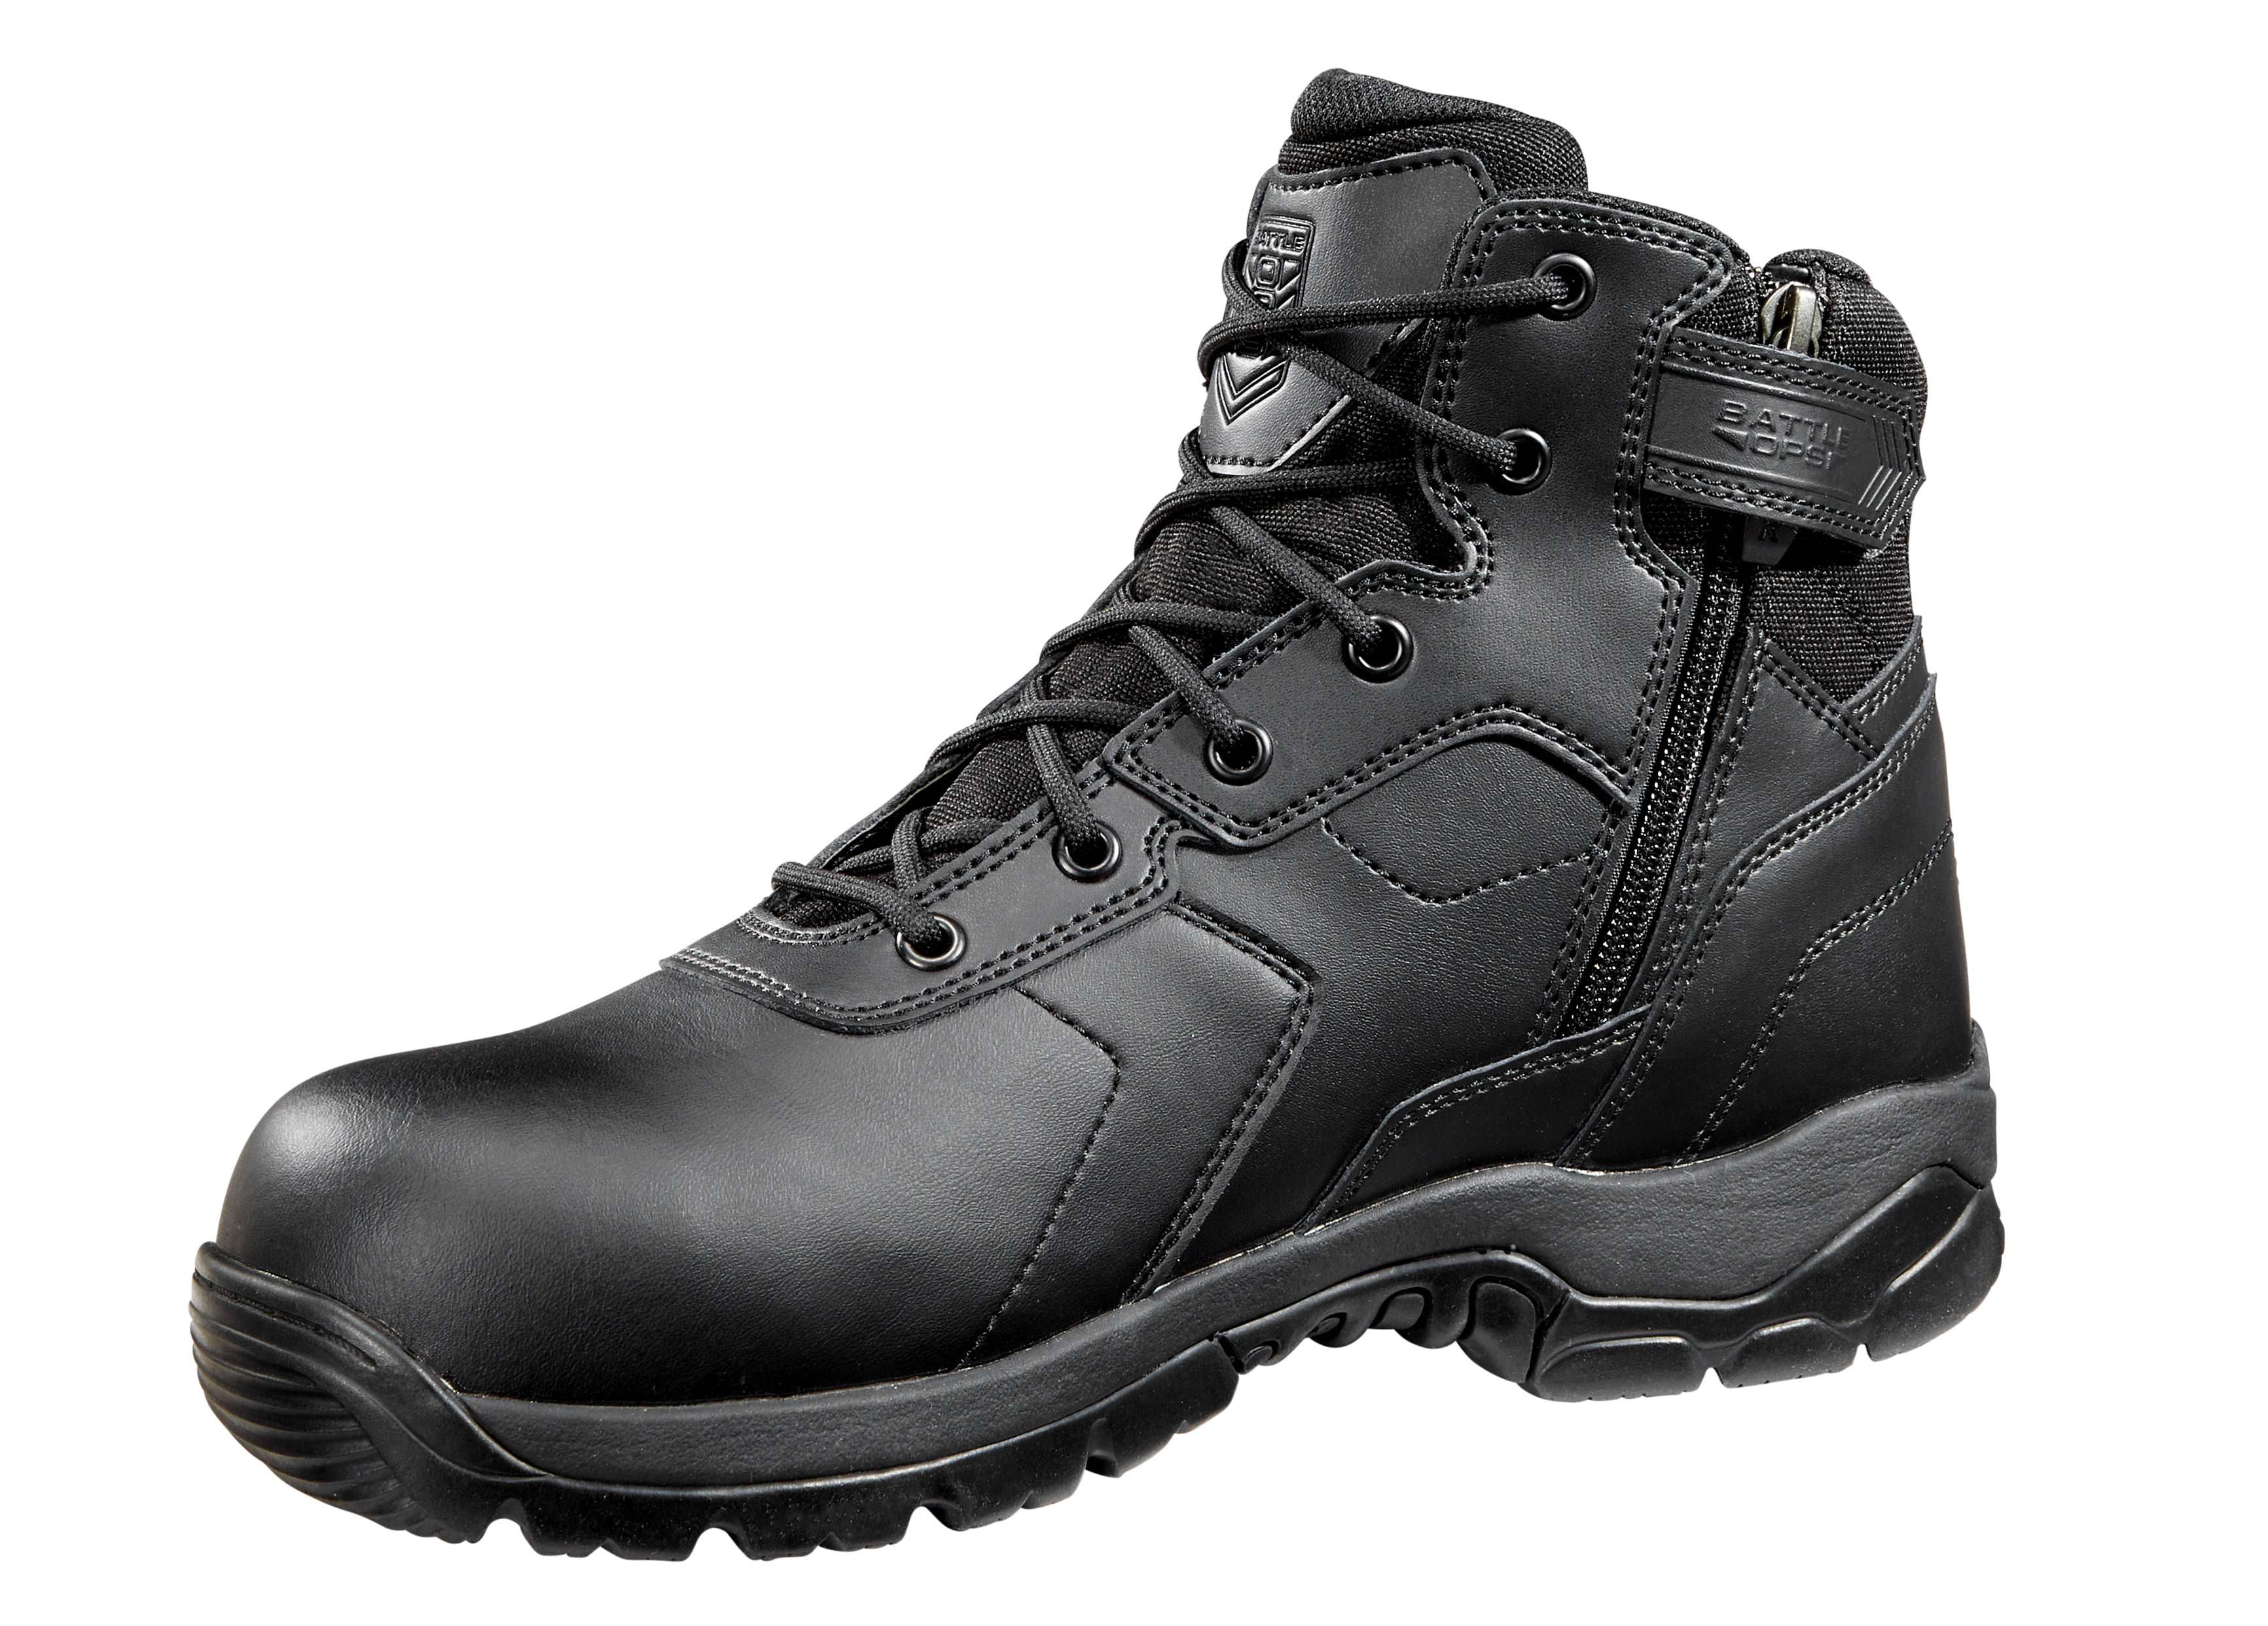 Oliver 45 Series 8" Leather Composite Toe Waterproof Men's Metatarsal Boots CSA 